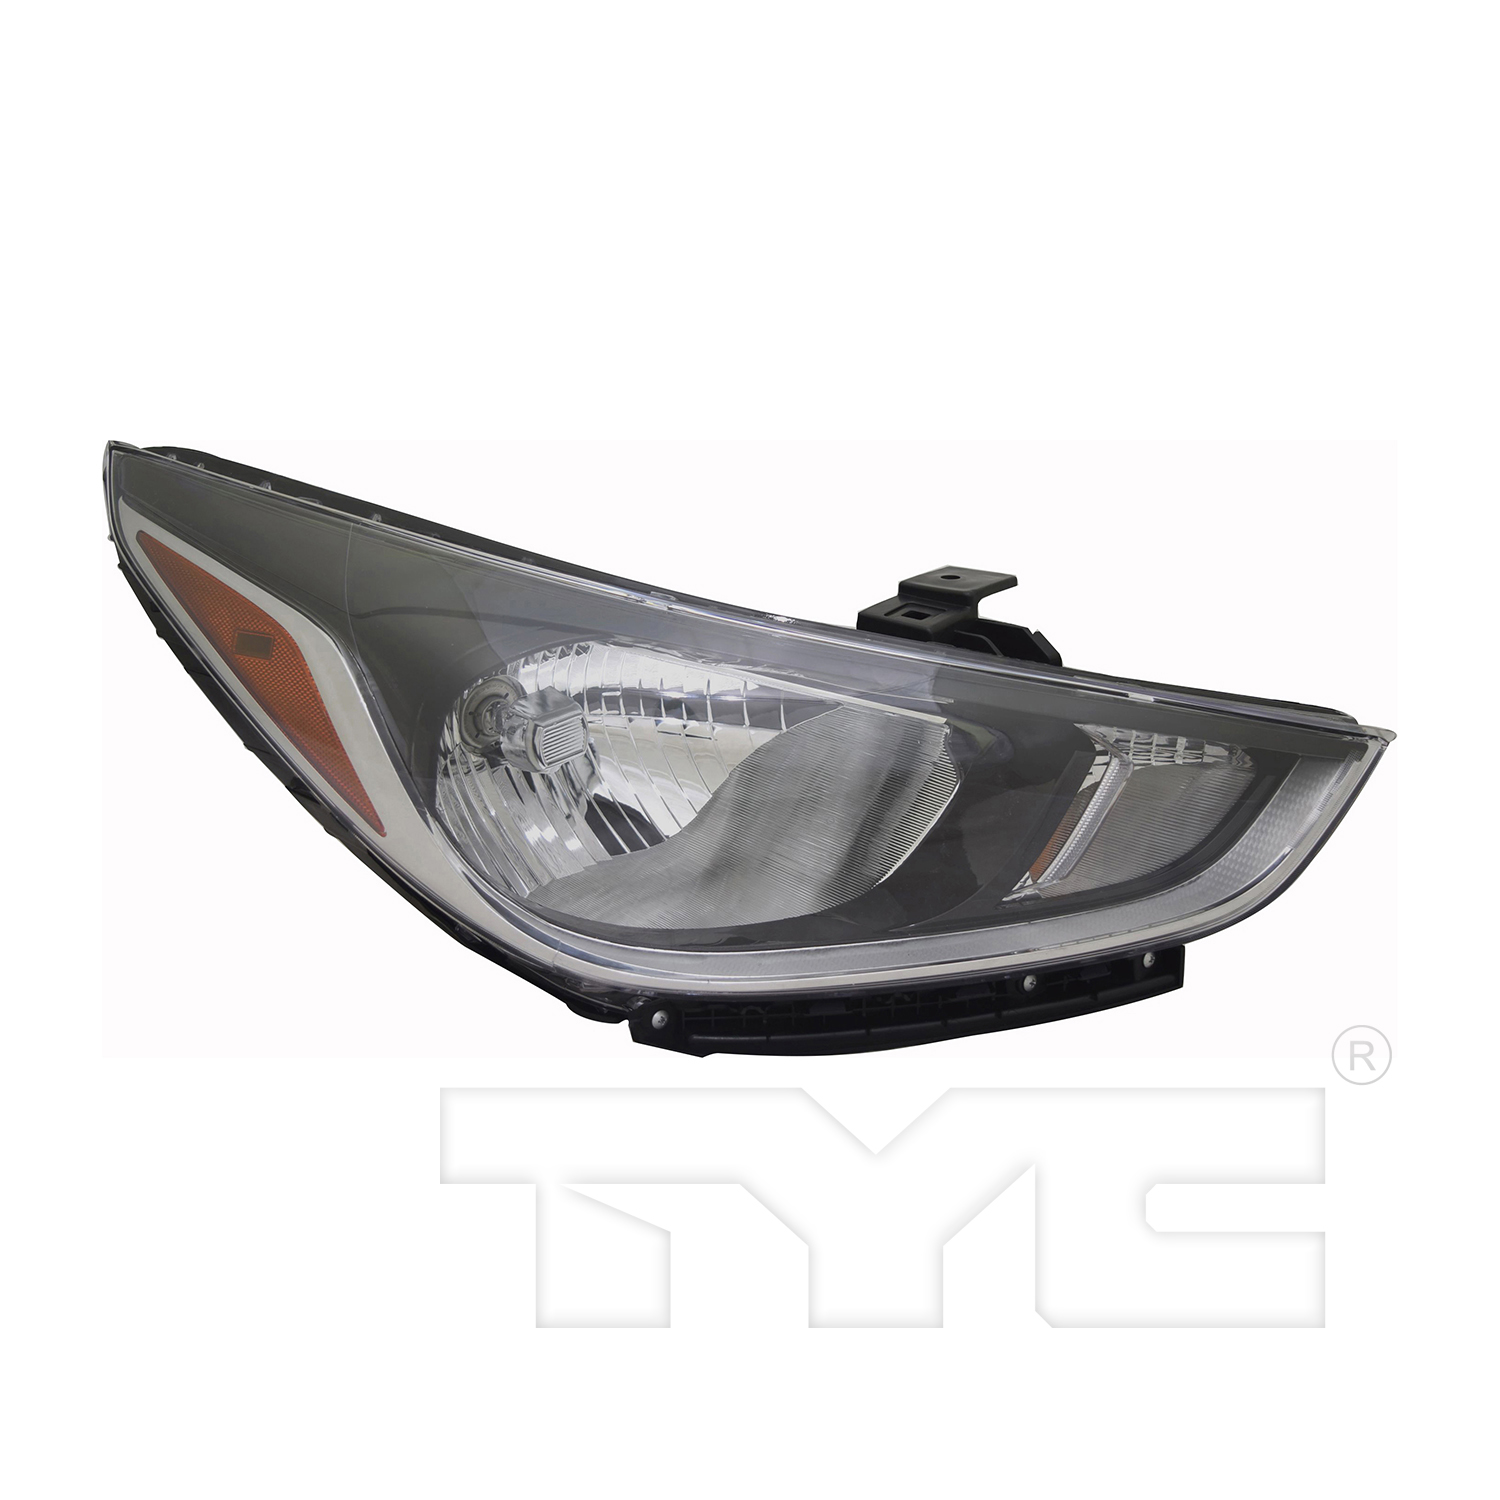 Aftermarket HEADLIGHTS for HYUNDAI - ACCENT, ACCENT,18-20,RT Headlamp assy composite